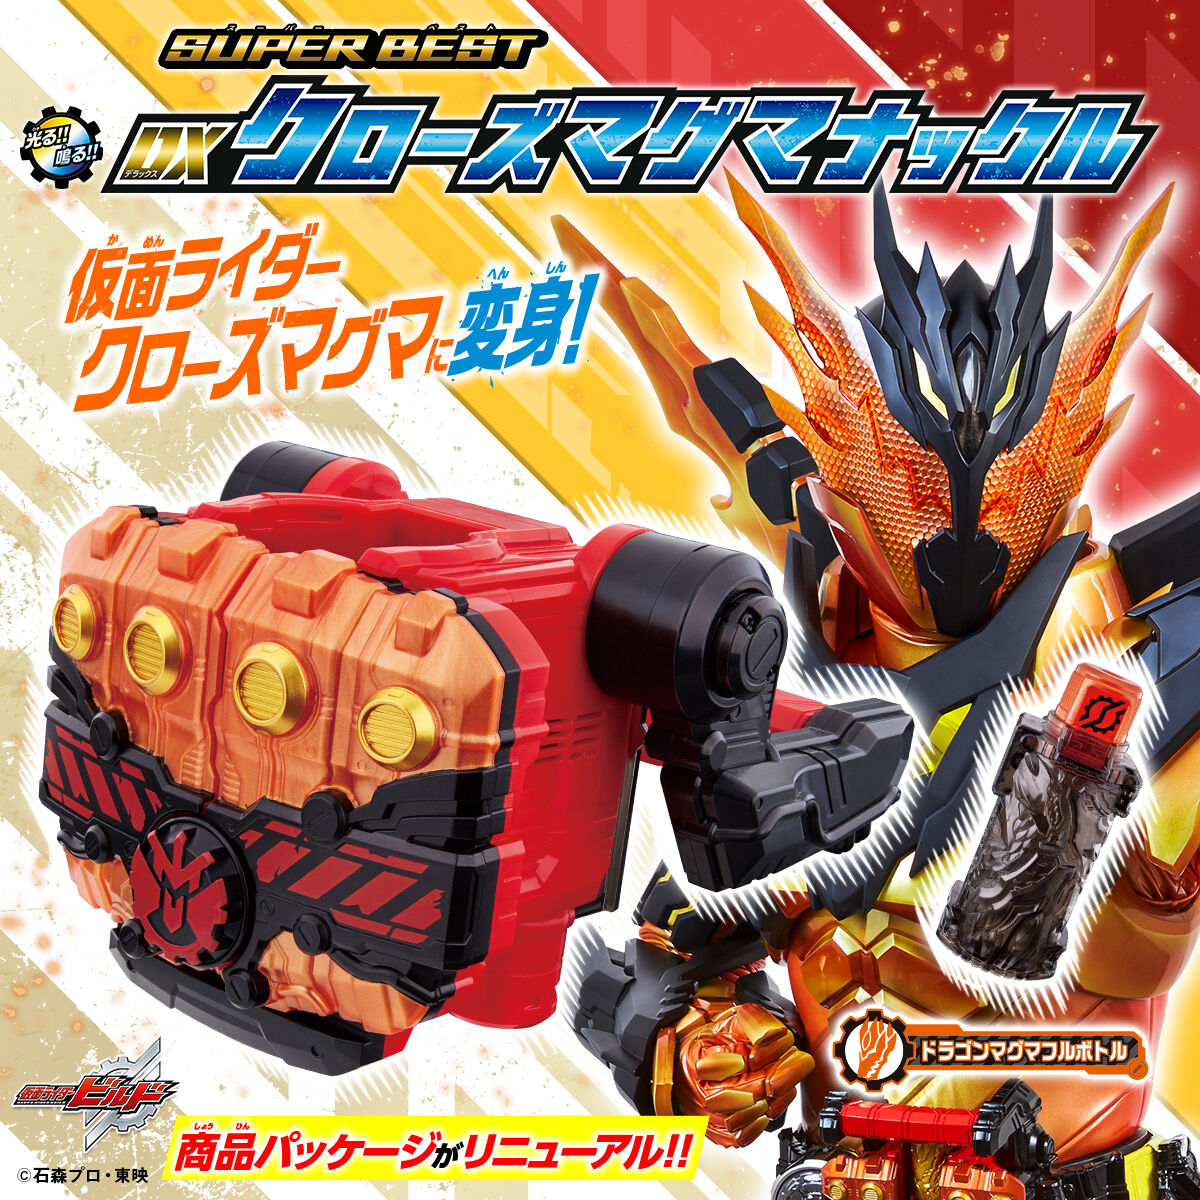 SUPER BEST DX Magma Knuckle